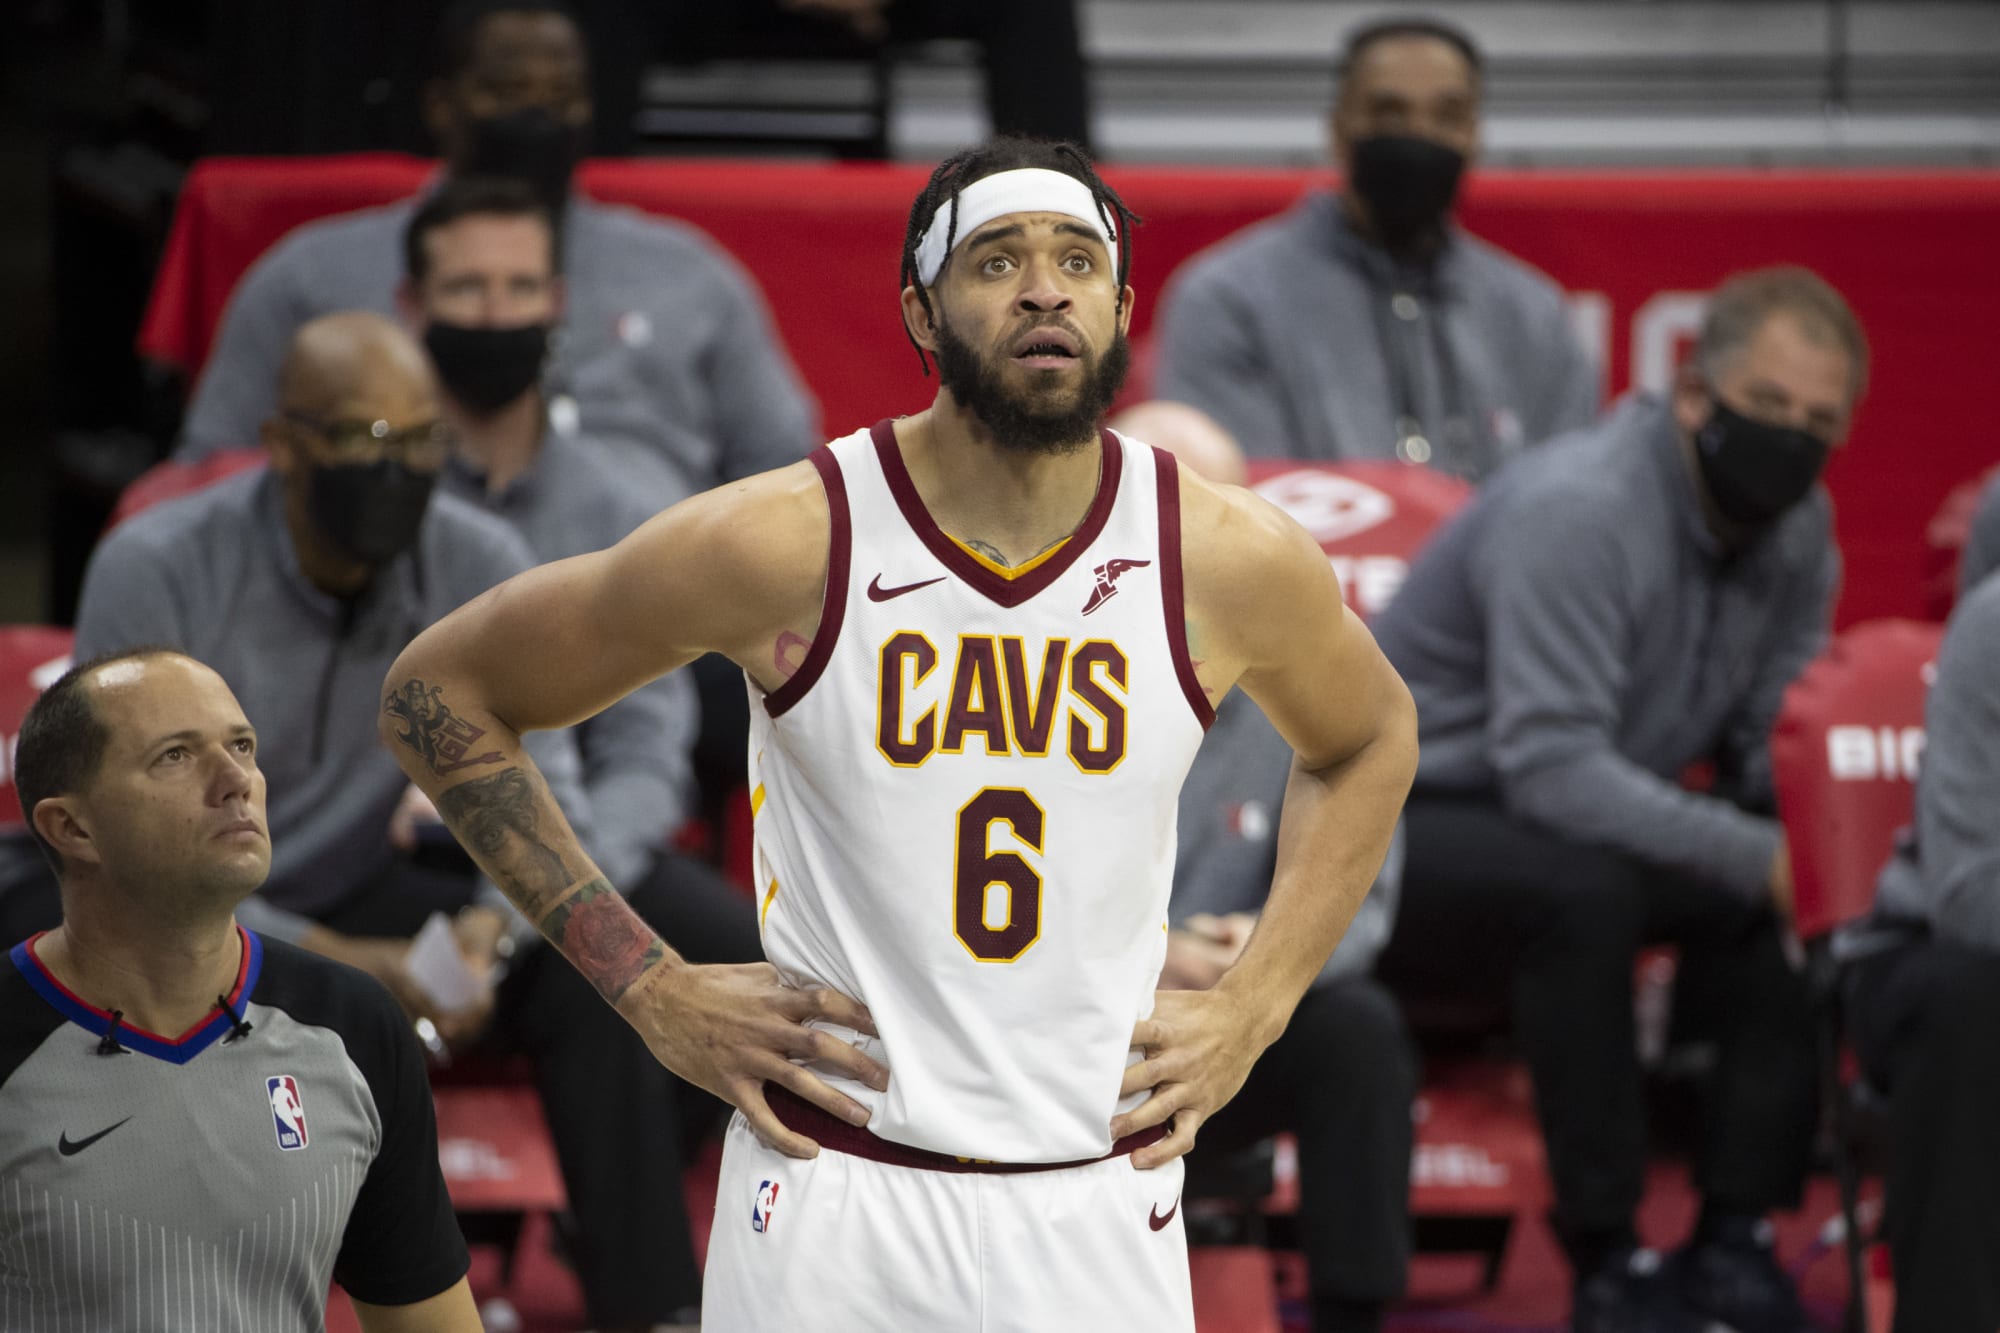 Raptors: This JaVale McGee trade gives Toronto the piece they need